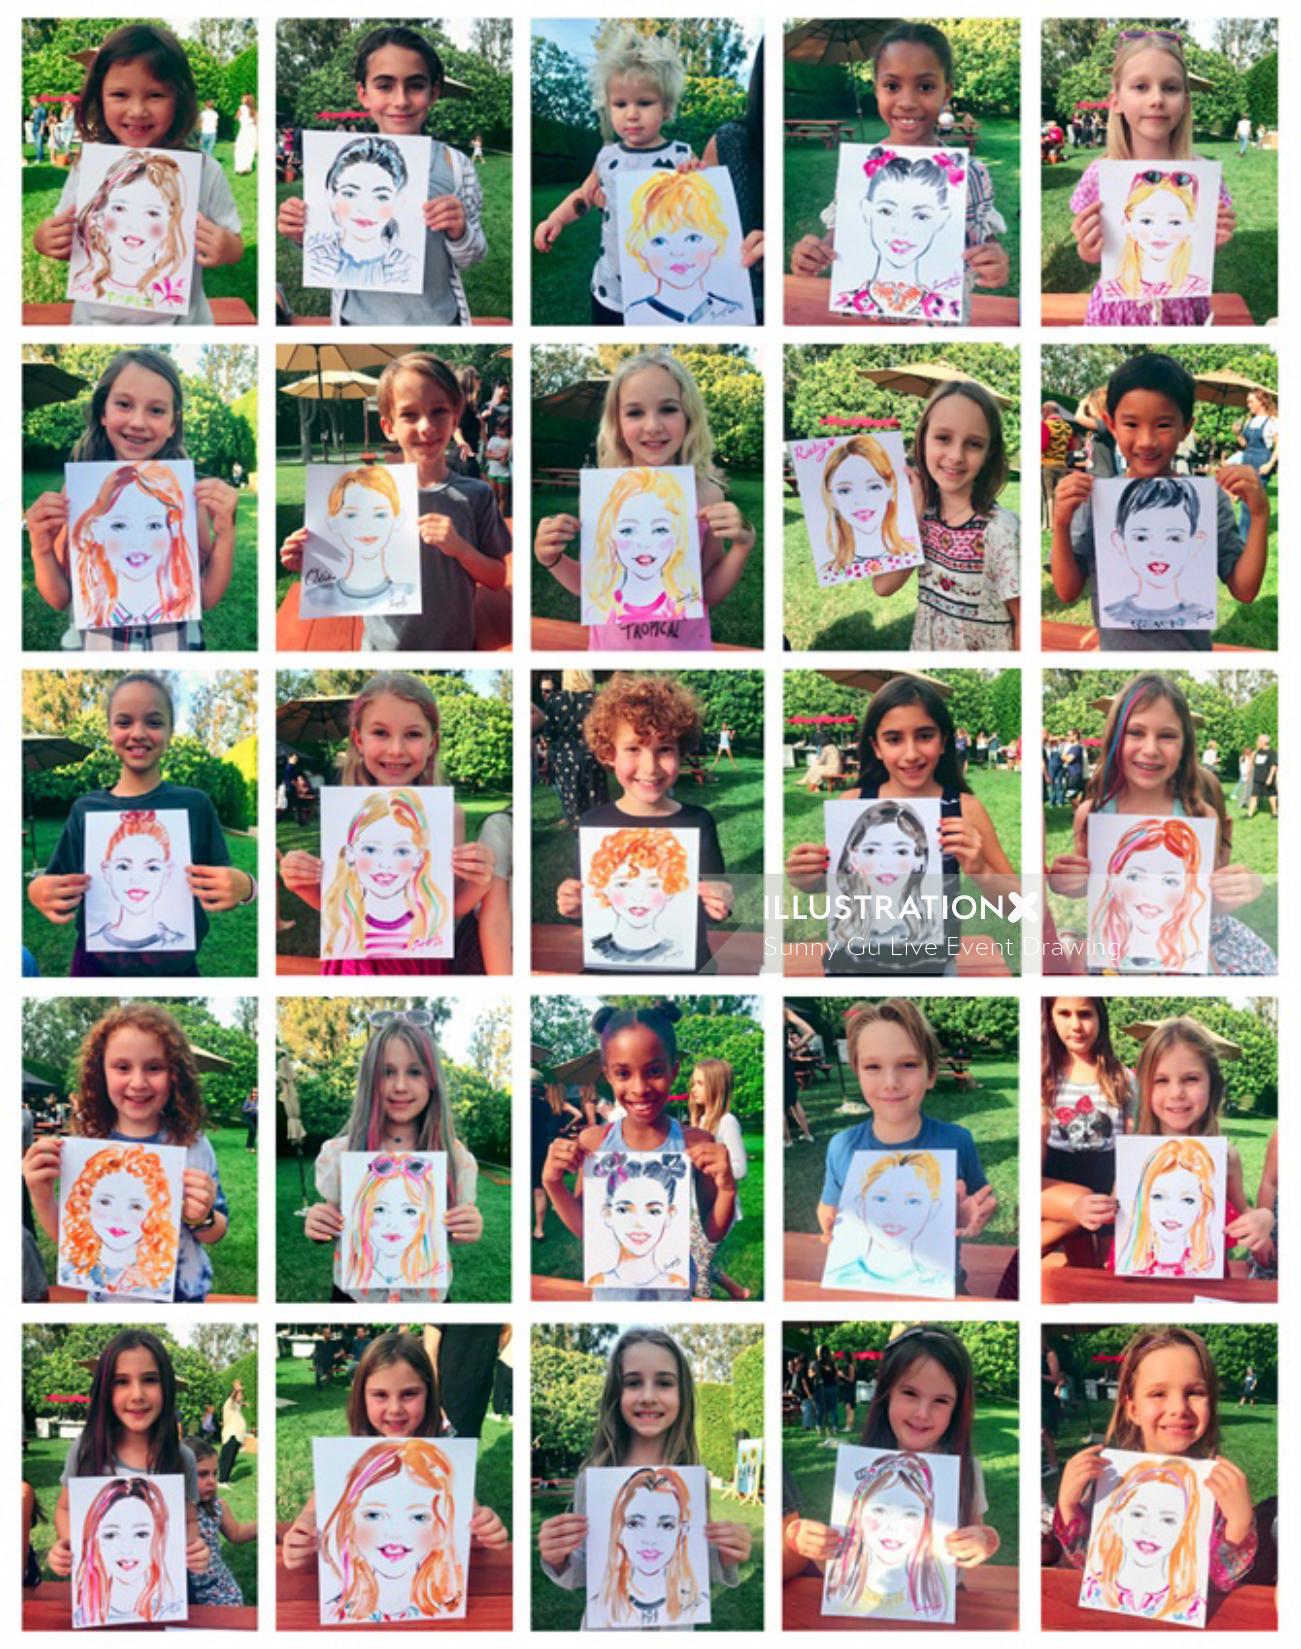 Live event drawing children with portraits